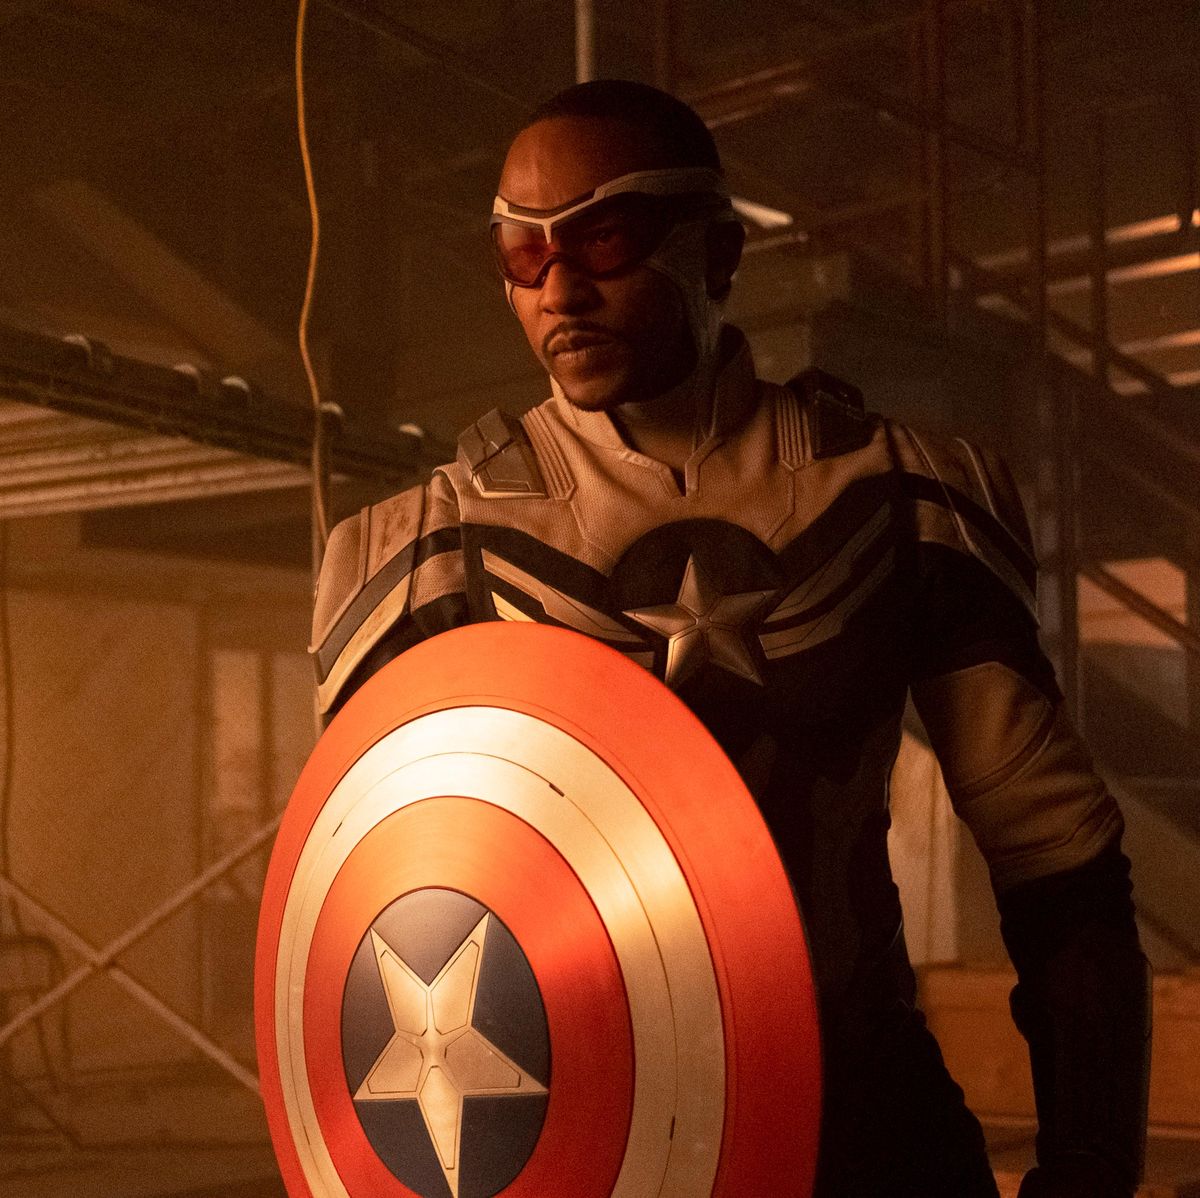 Captain America 4 release date and more about New World Order